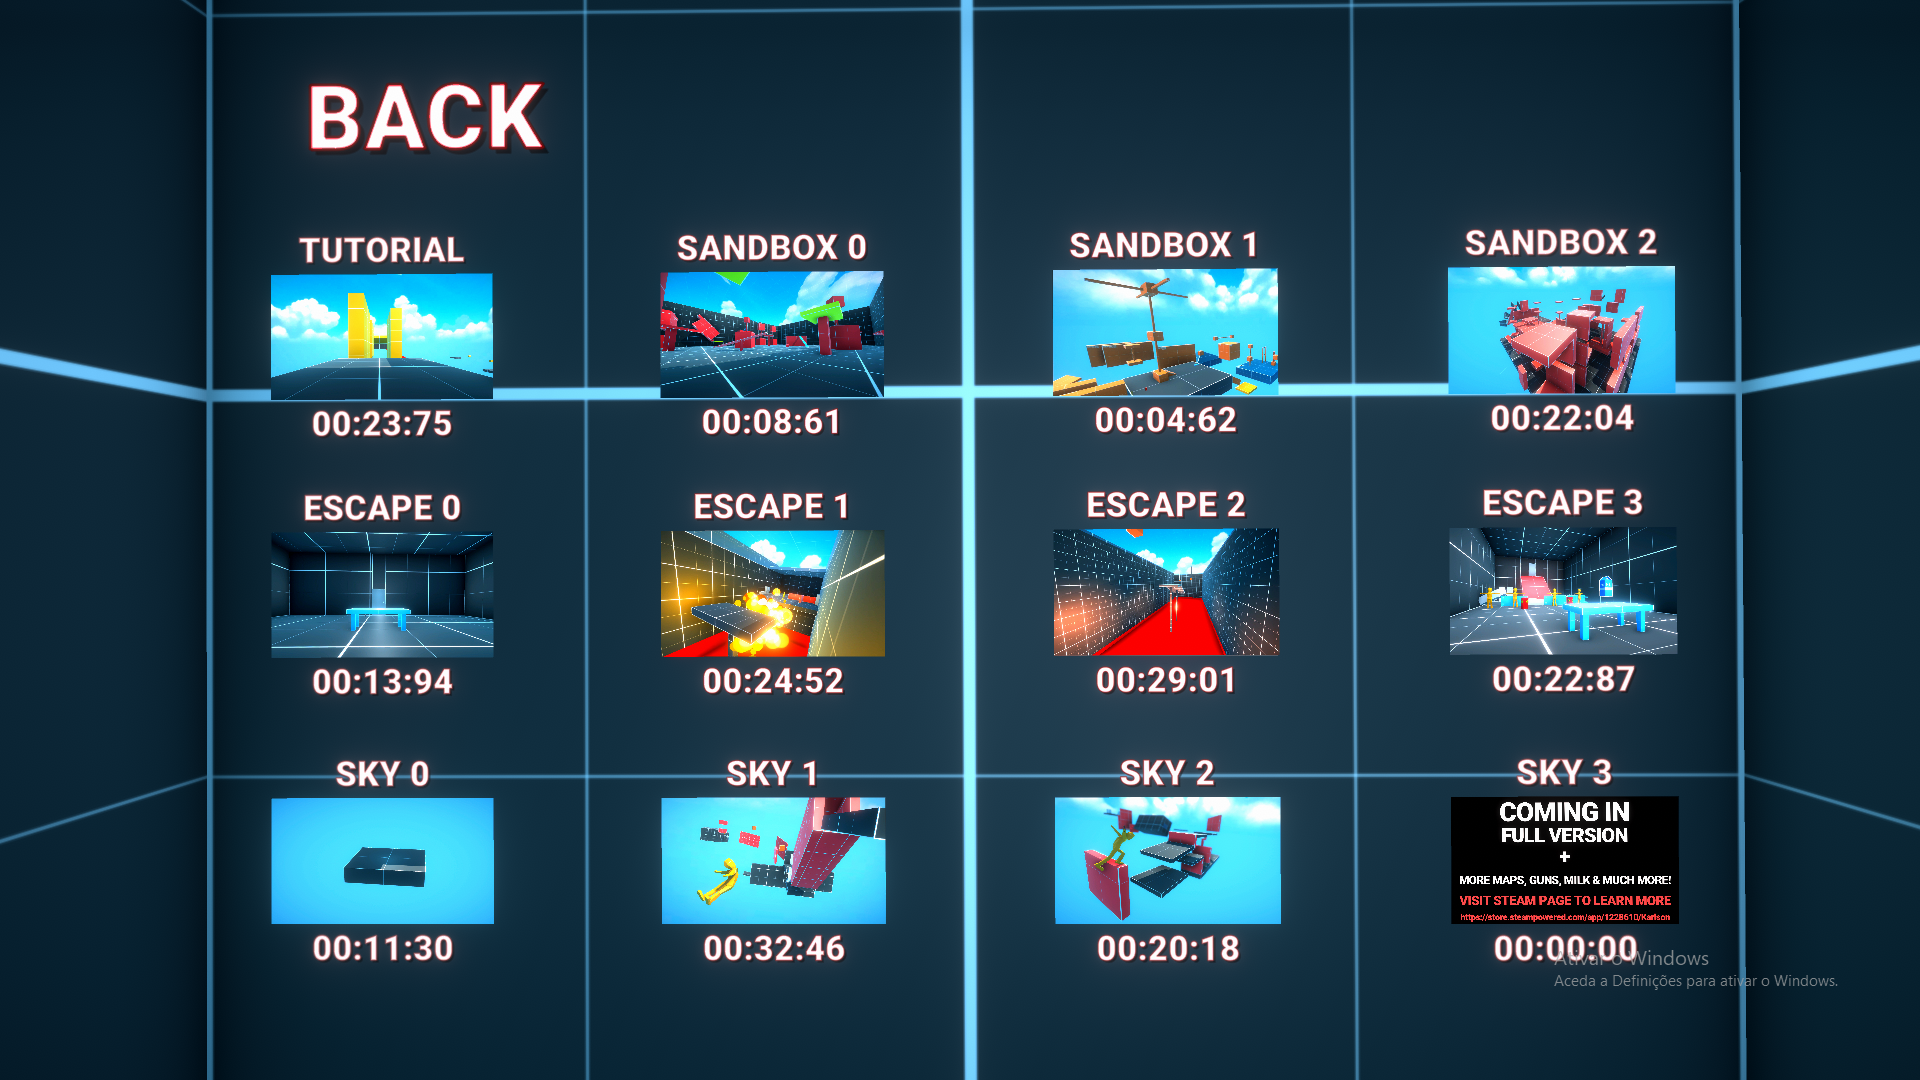 This is my best time, I'm really proud of the time on sandbox1